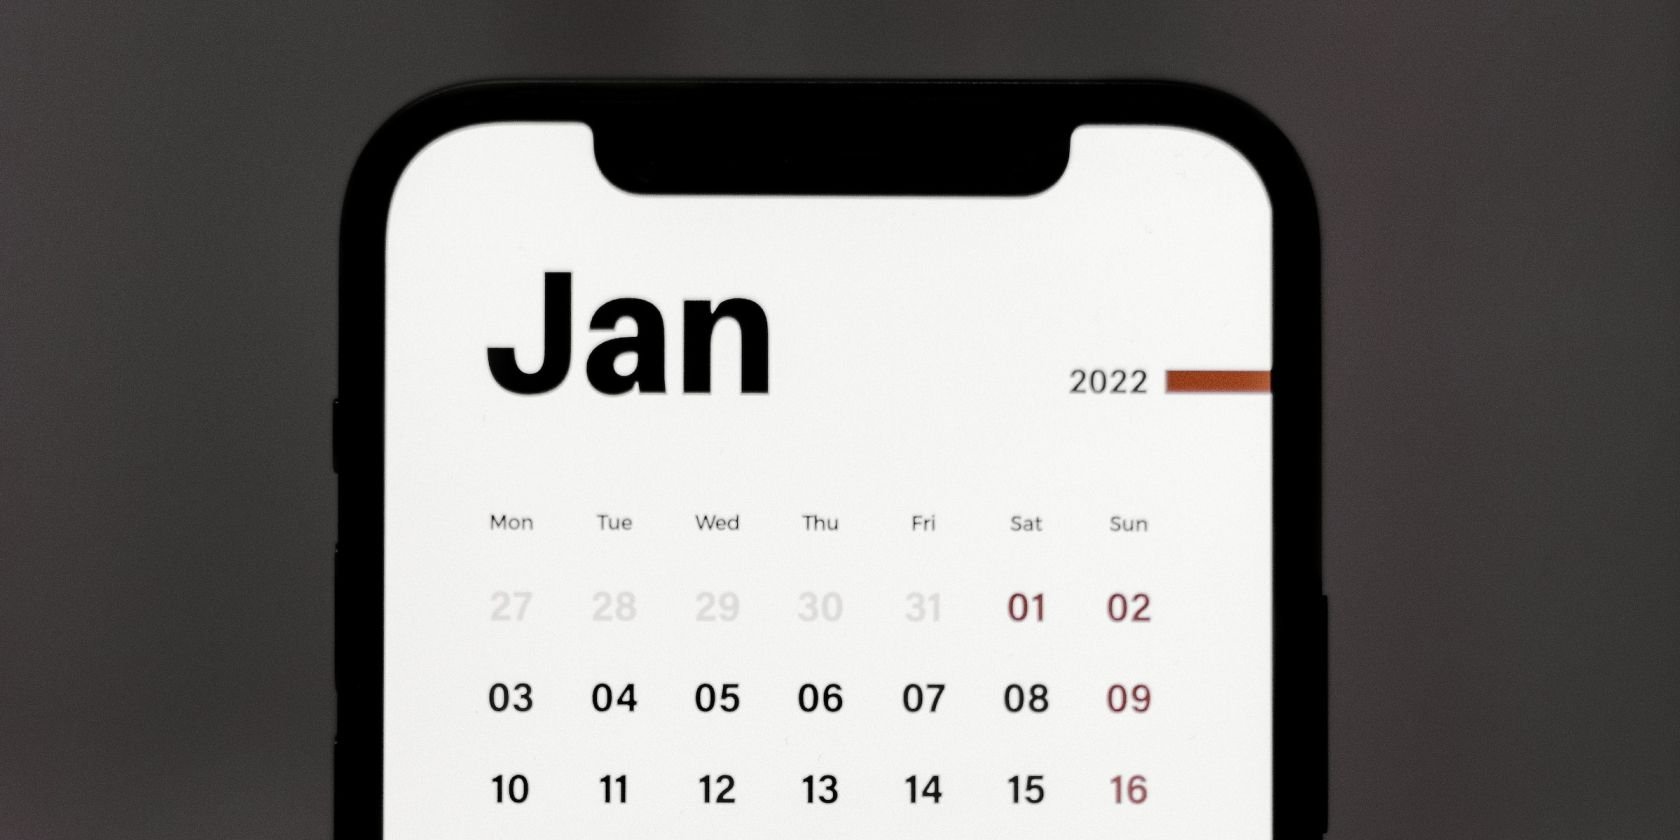 How to Get the Most Out of the Calendar on an iPhone